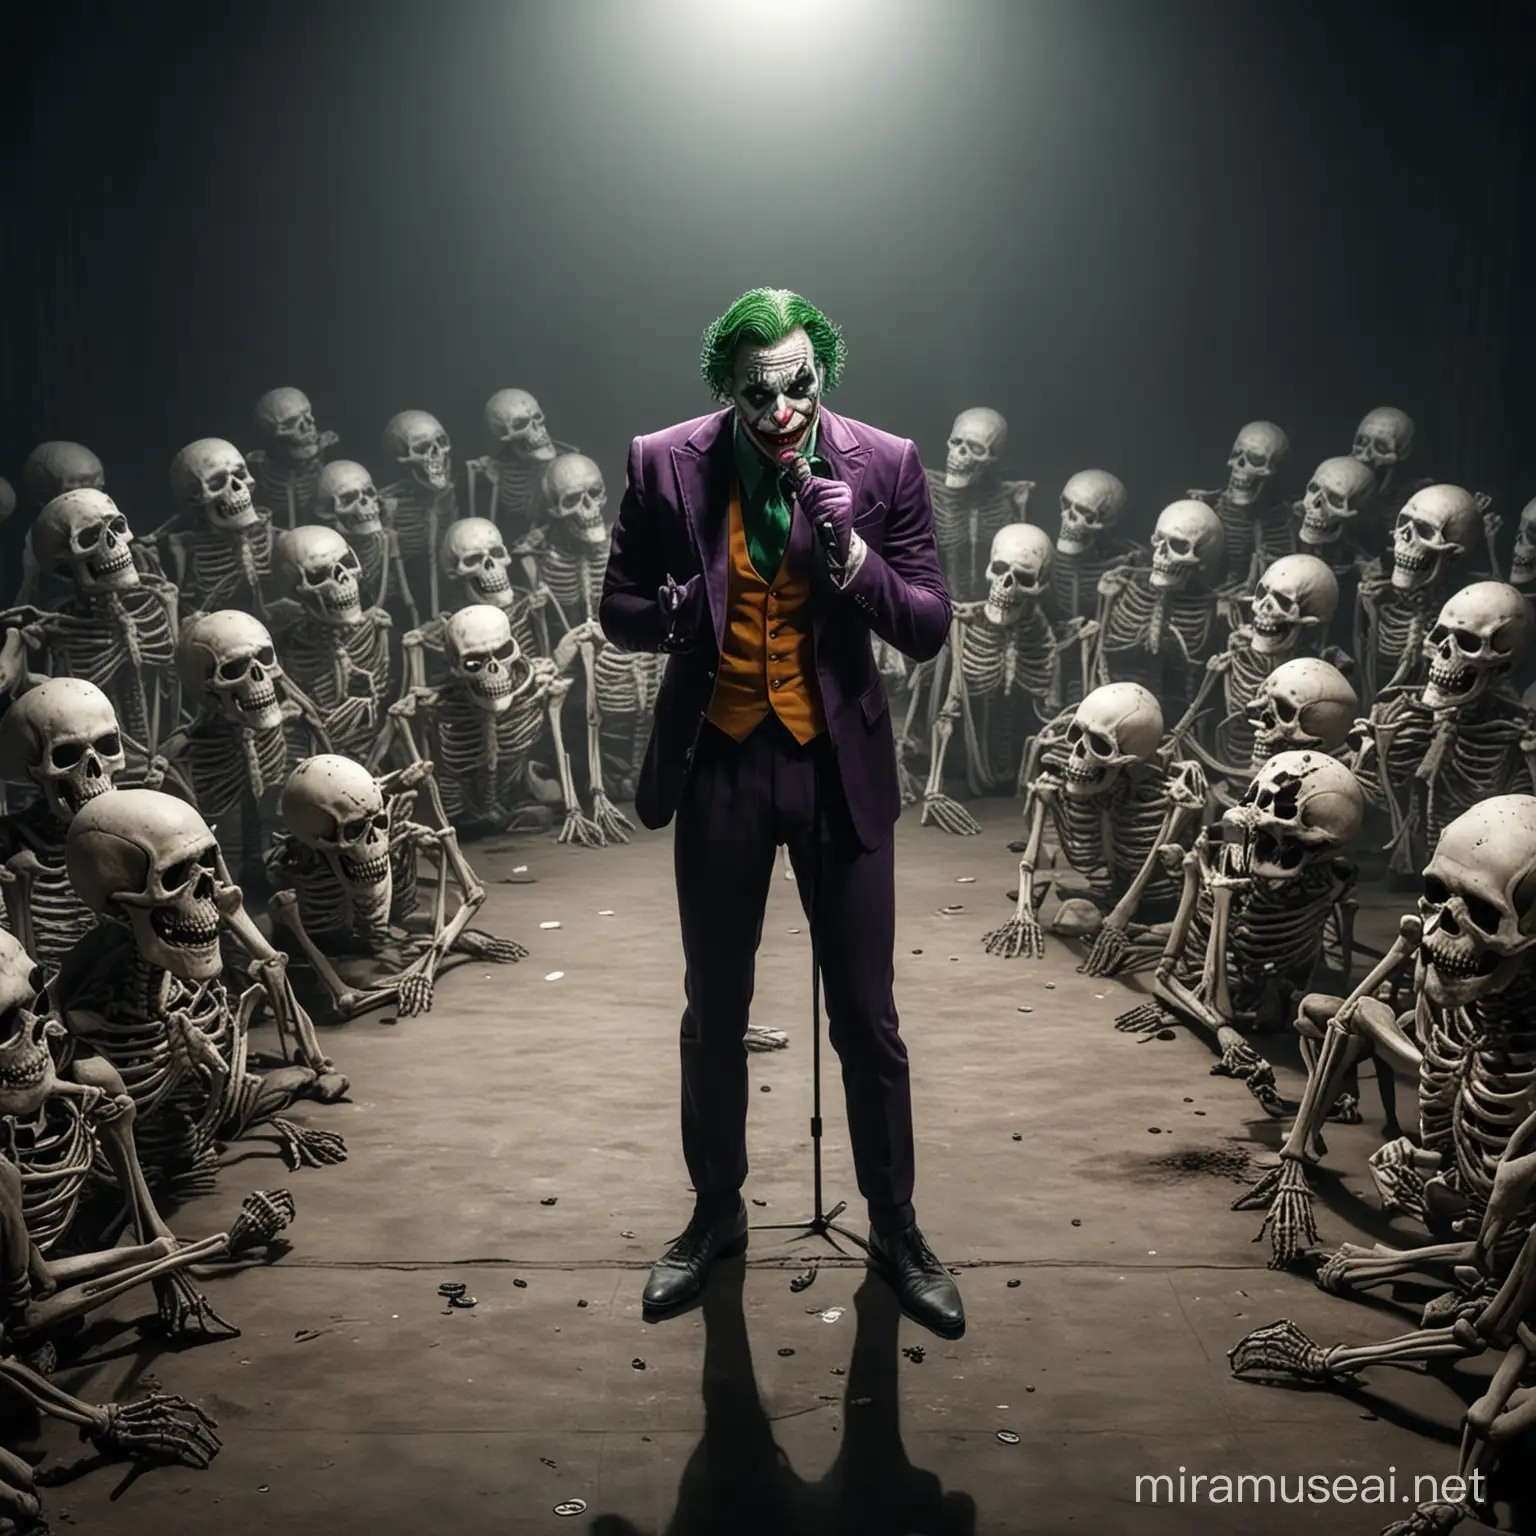 cartoonish joker superhero trying to do stand up comedy in a stage with high angle camera infront of skeletons but he is not funny and he is sad and feeling dead inside
